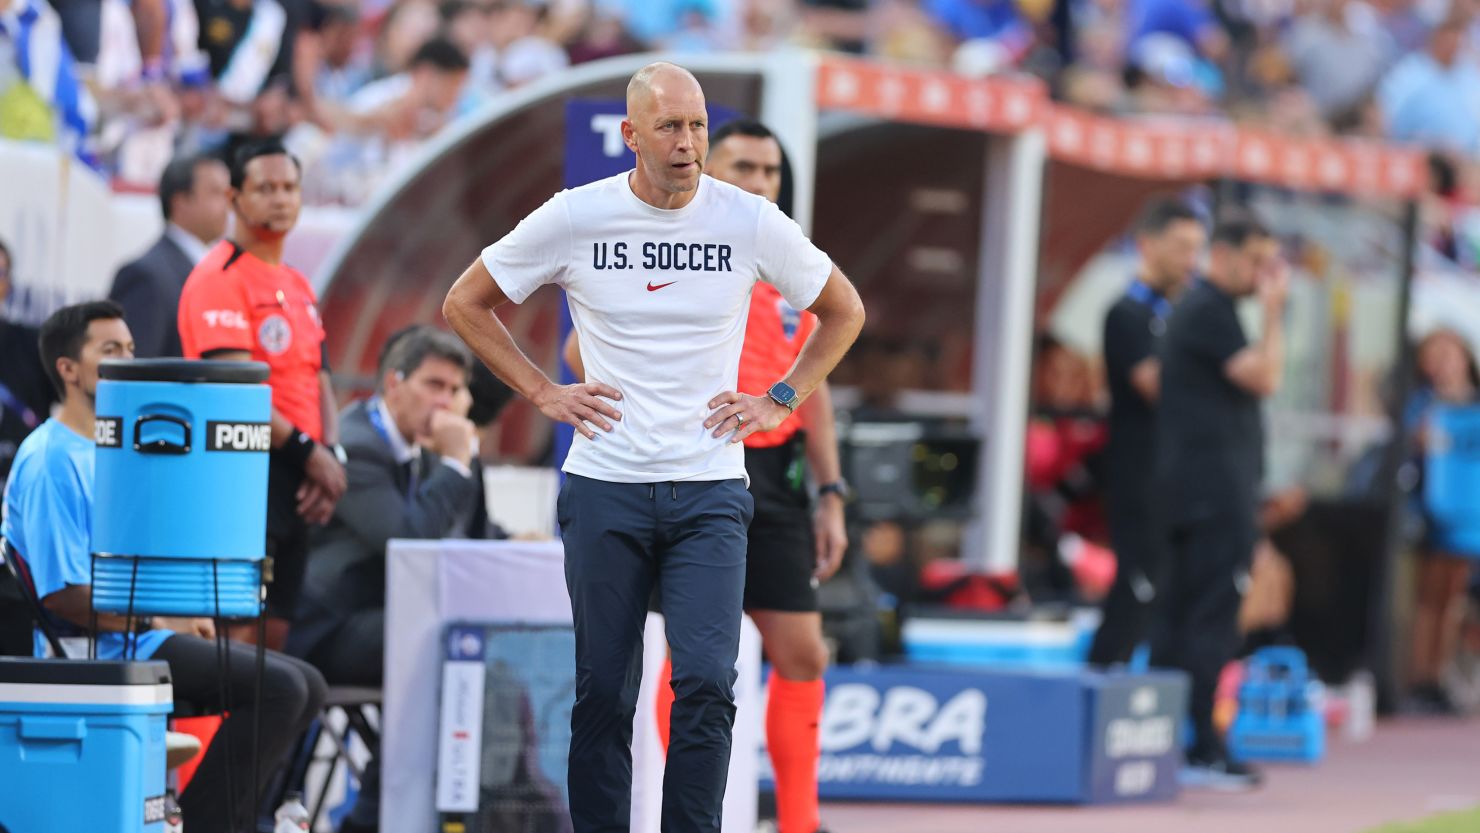 Gregg Berhalter cut a frustrated figure on the sideline during Monday's defeat to Uruguay.